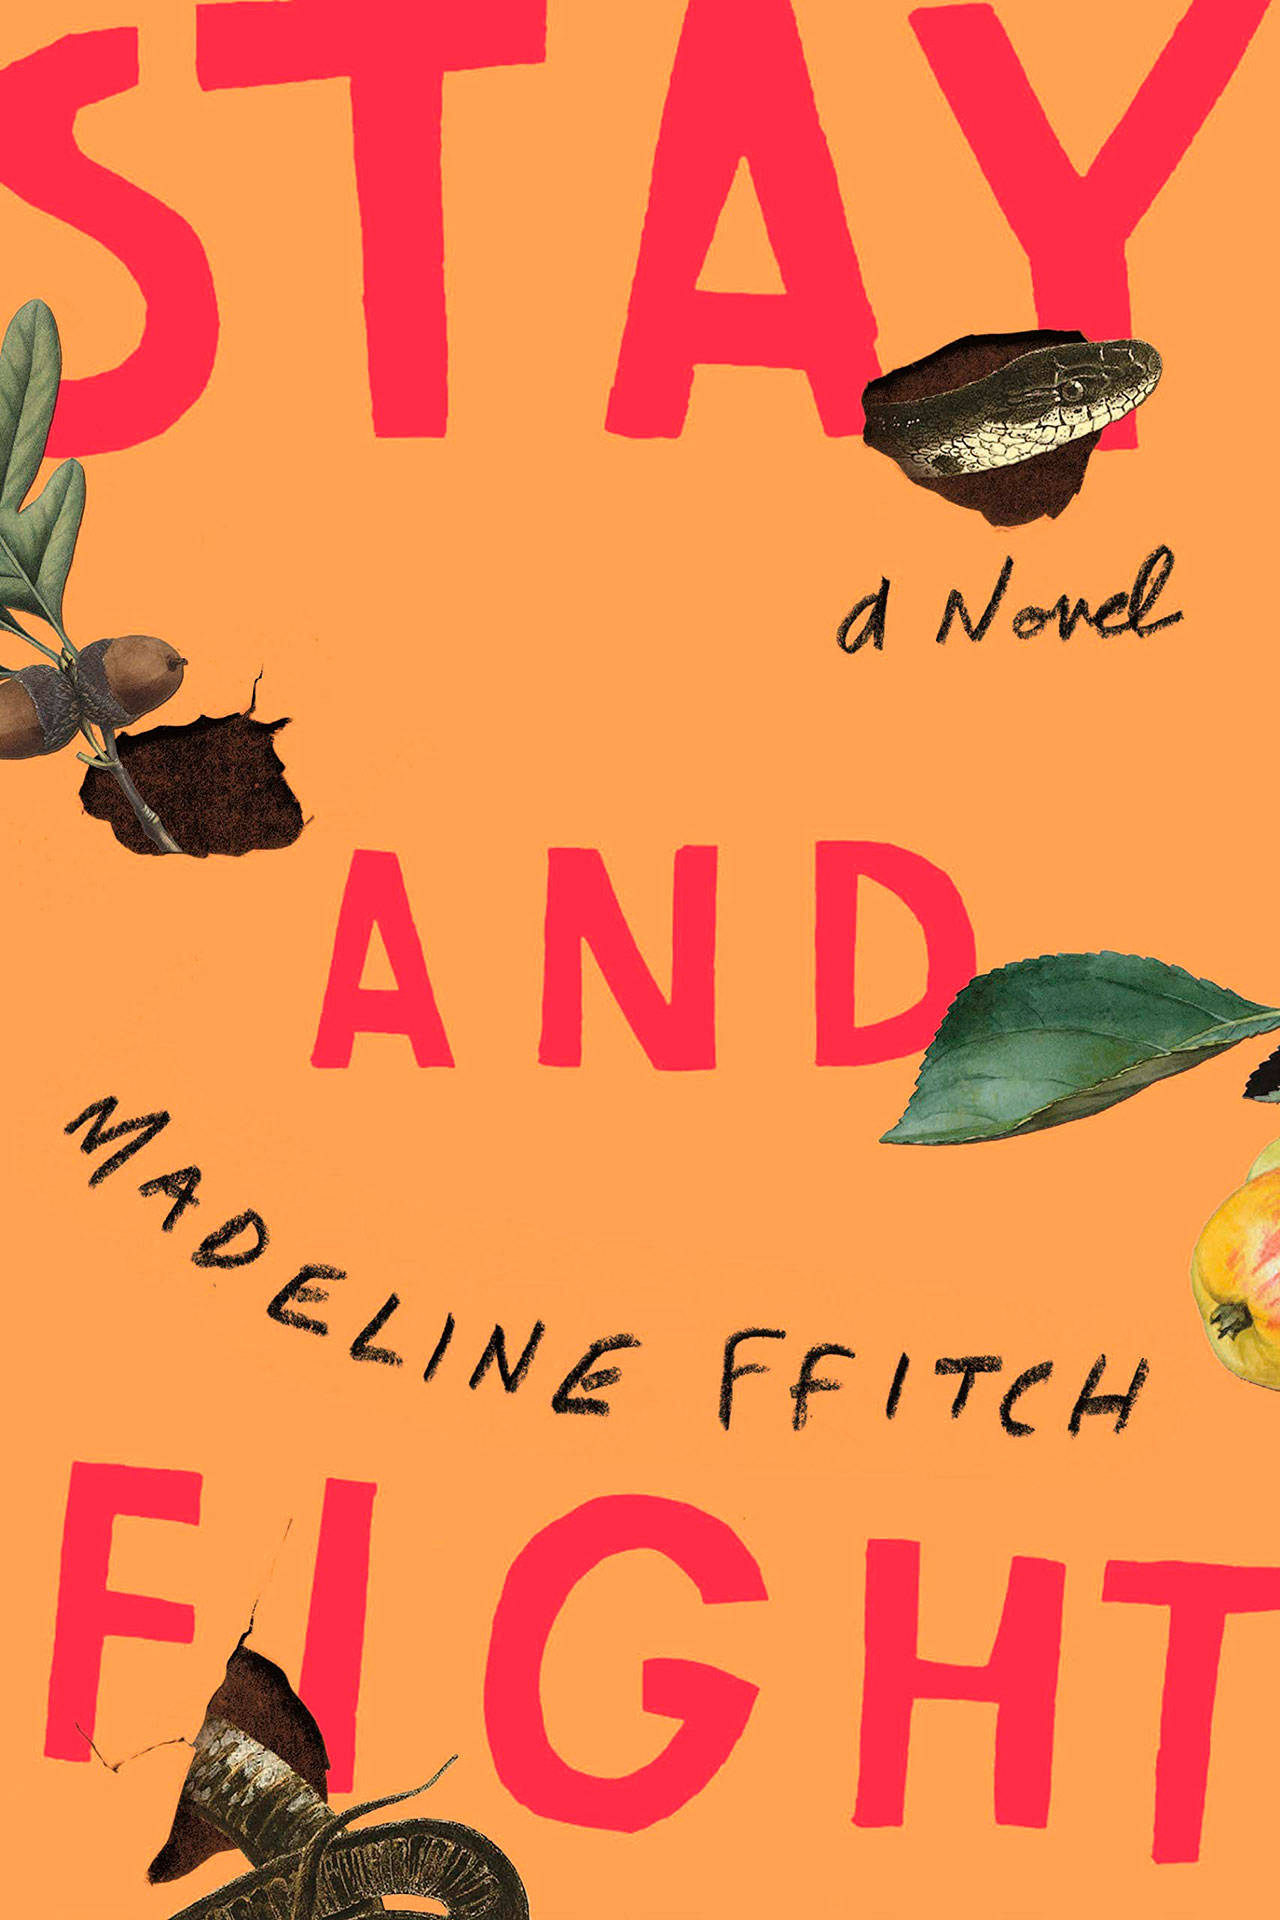 Image courtesy of Eagle Harbor Book Company | Madeline ffitch will visit Eagle Harbor Book Company at 3 p.m. Sunday, Oct. 27 to discuss her debut novel “Stay and Fight.”